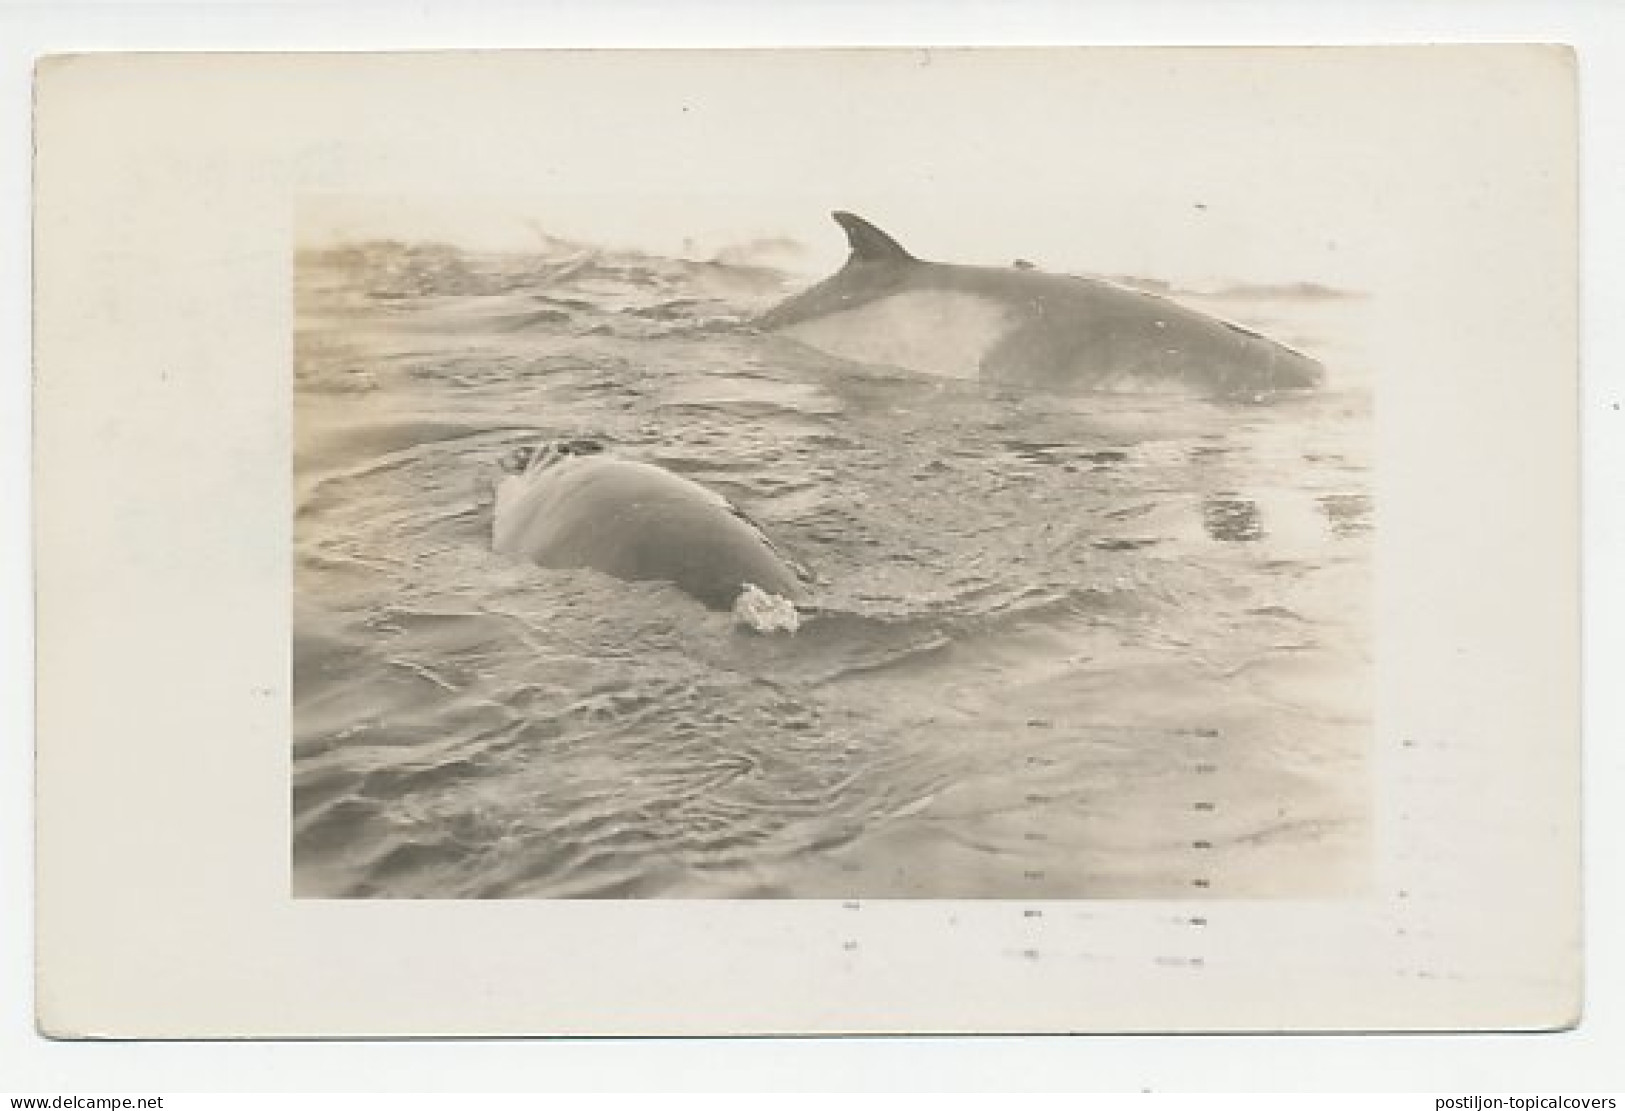 Card / Postmark USA 1934 Byrd Antarctic Expedition II - Photo Postcard Whale - Arktis Expeditionen